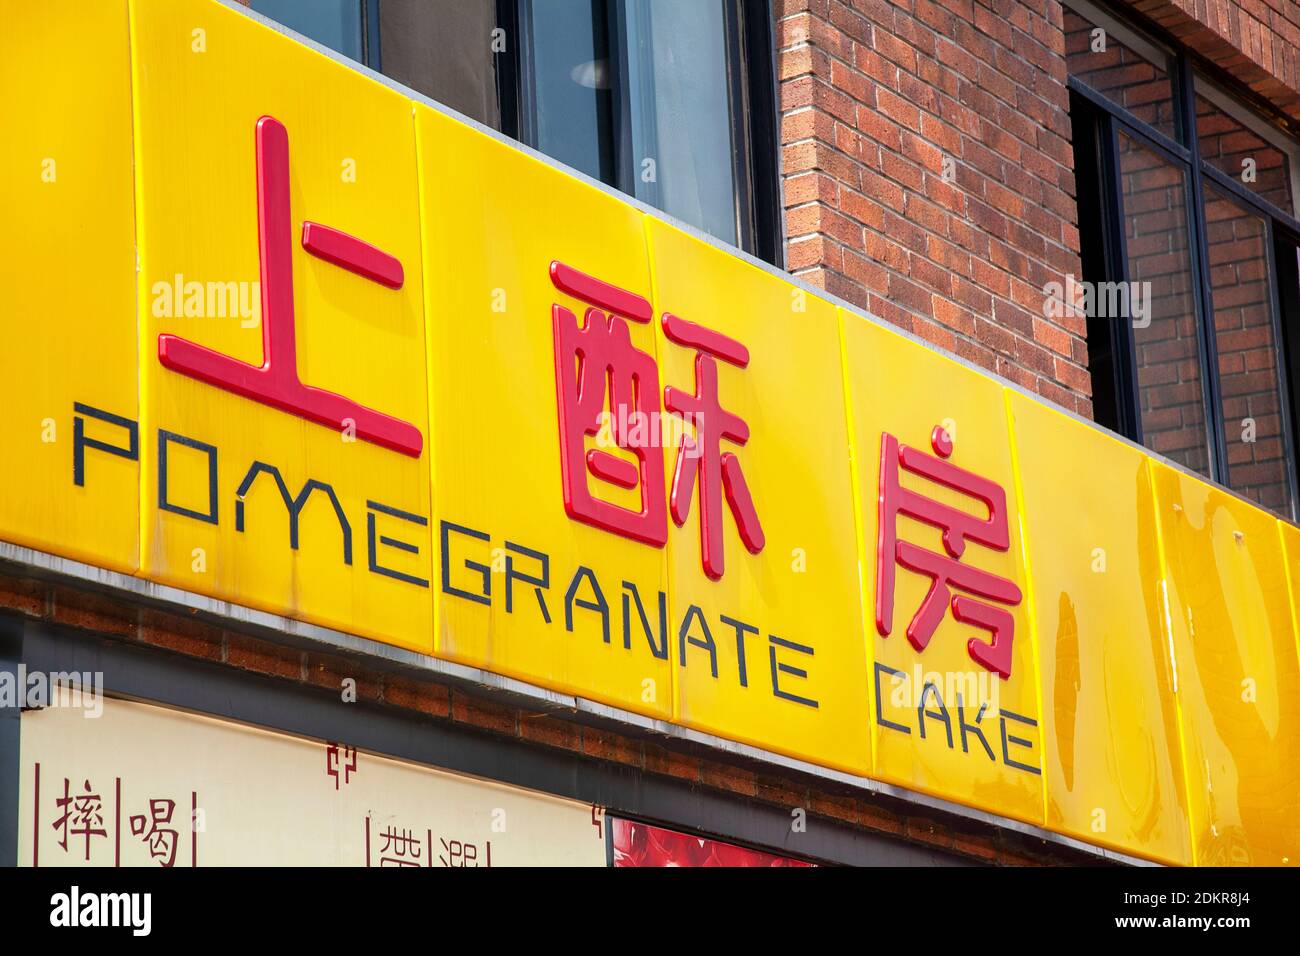 Pomegranate Cake shop advertising sign in Xian Xi'an China Stock Photo